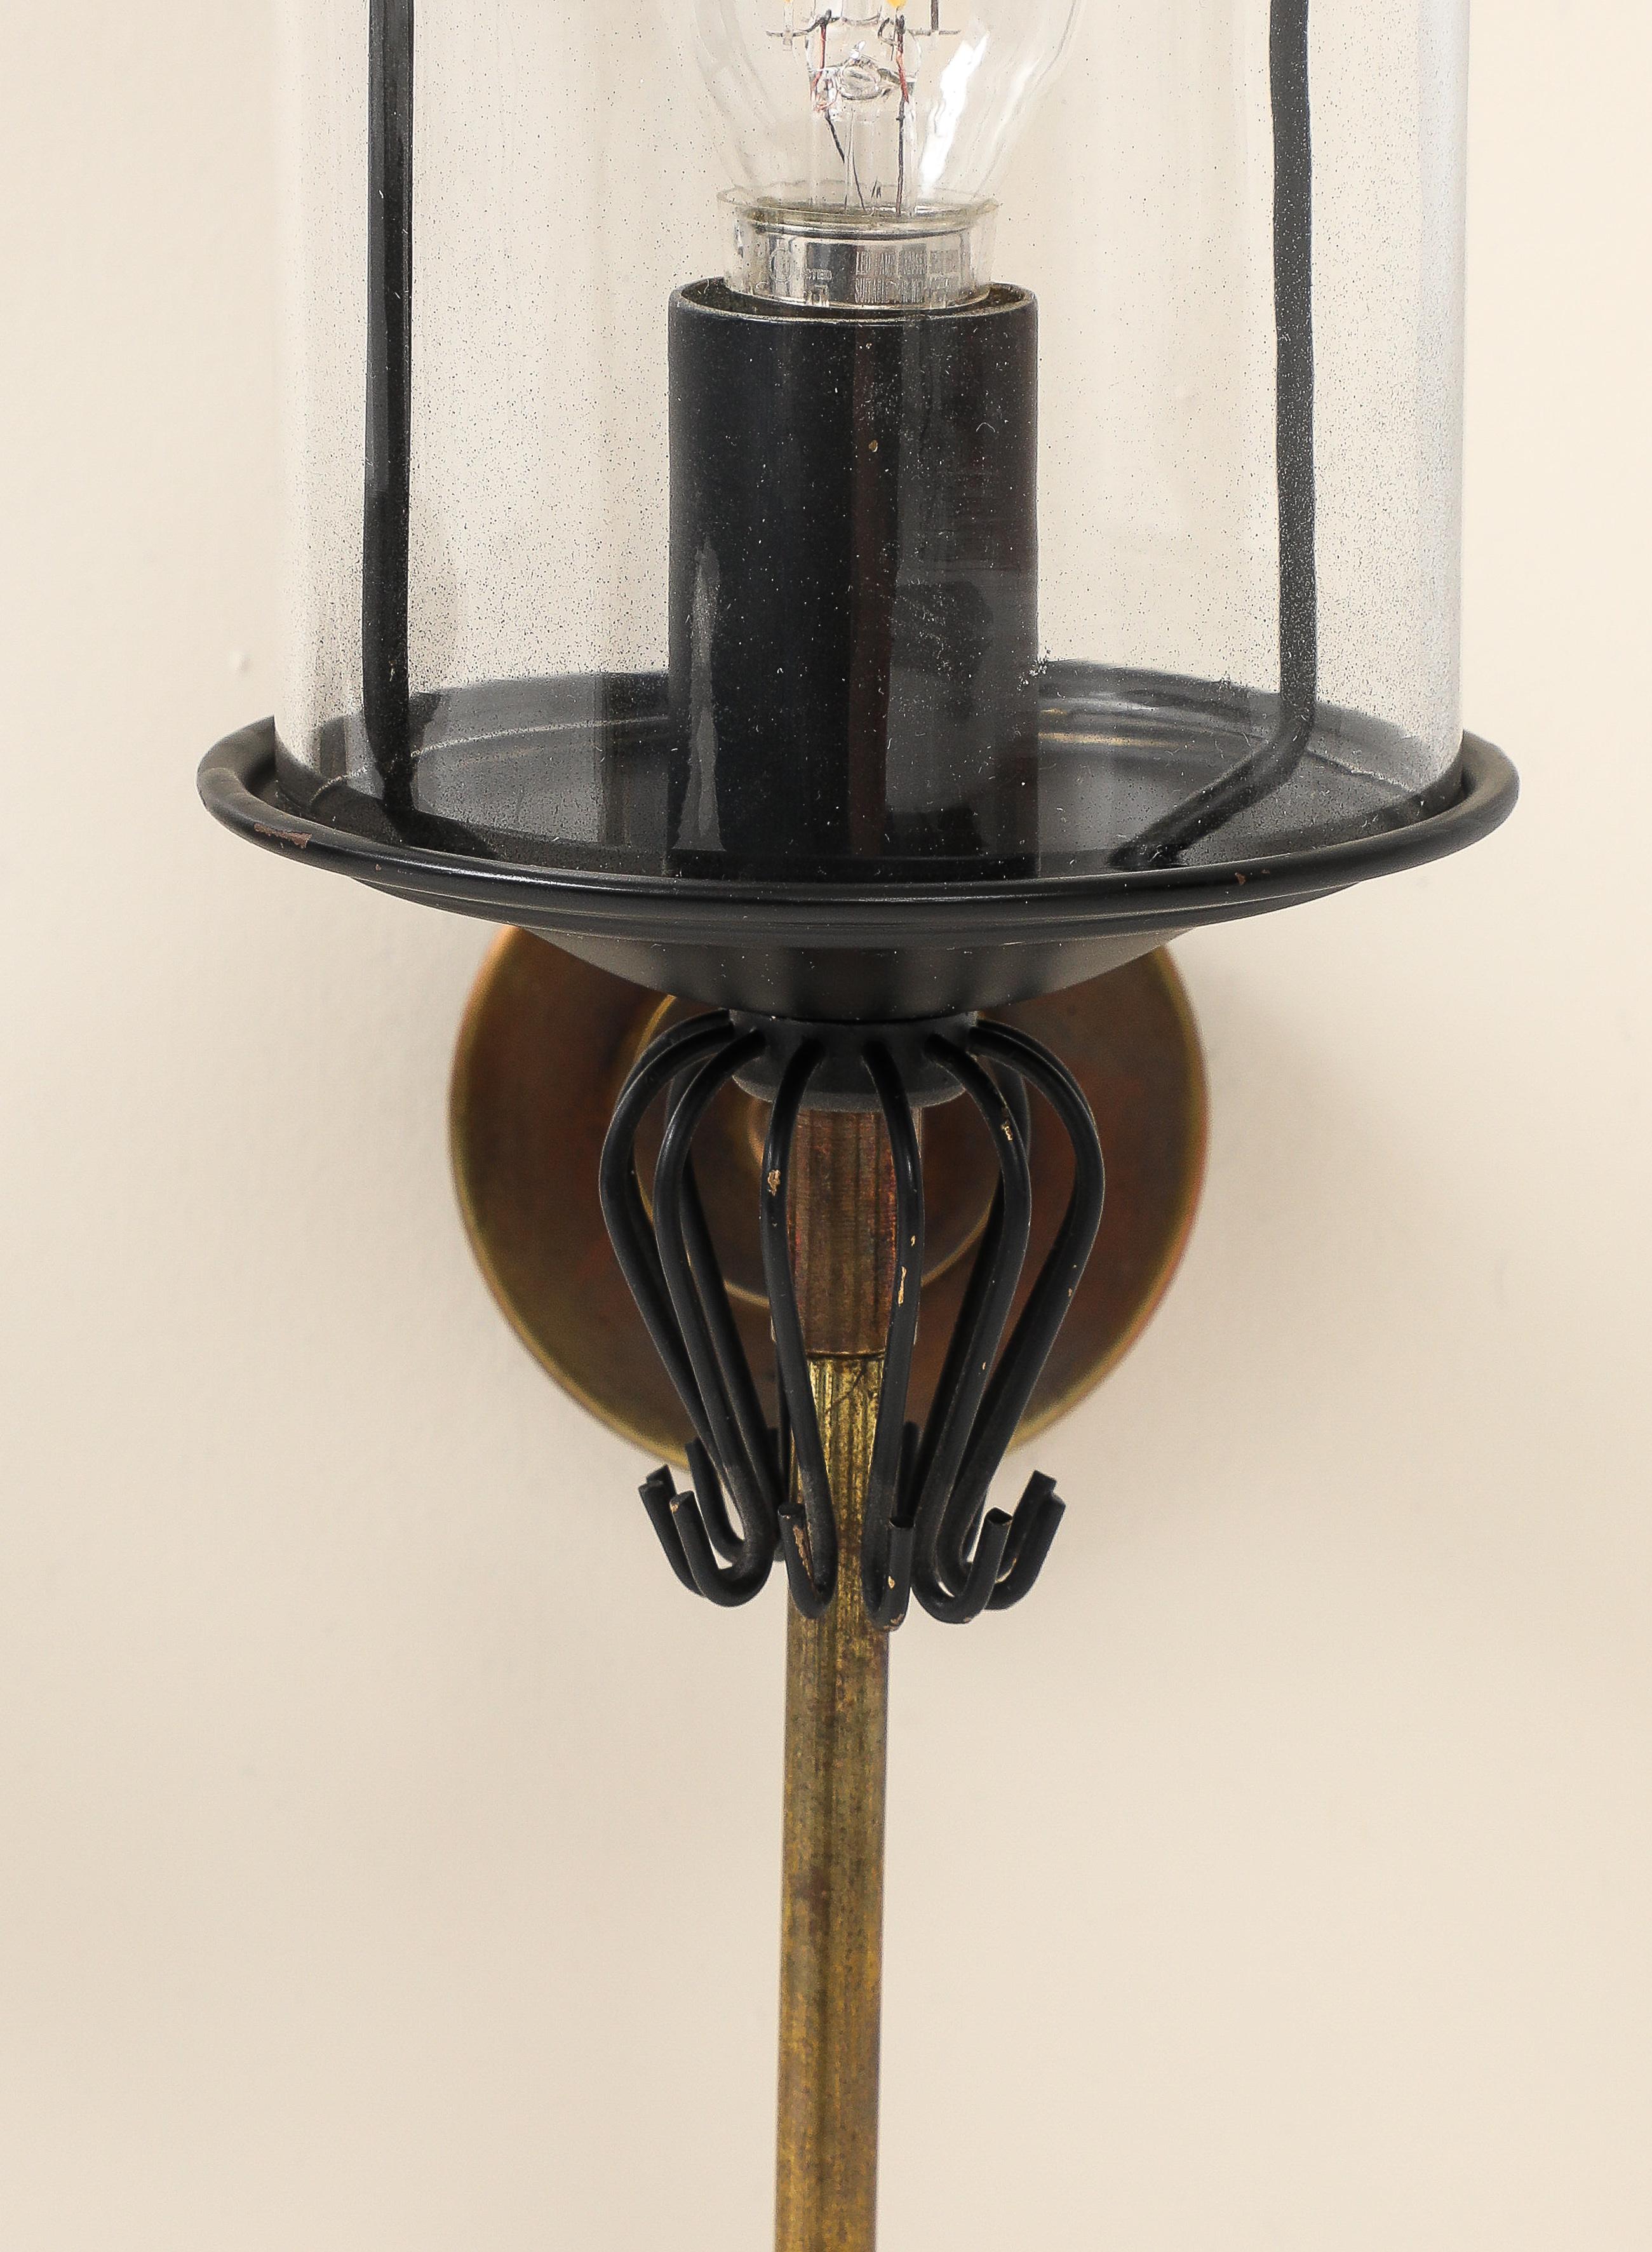 Black Enameled Steel, Tole, Brass and Glass Sconces by Lunel - France 1960's For Sale 4